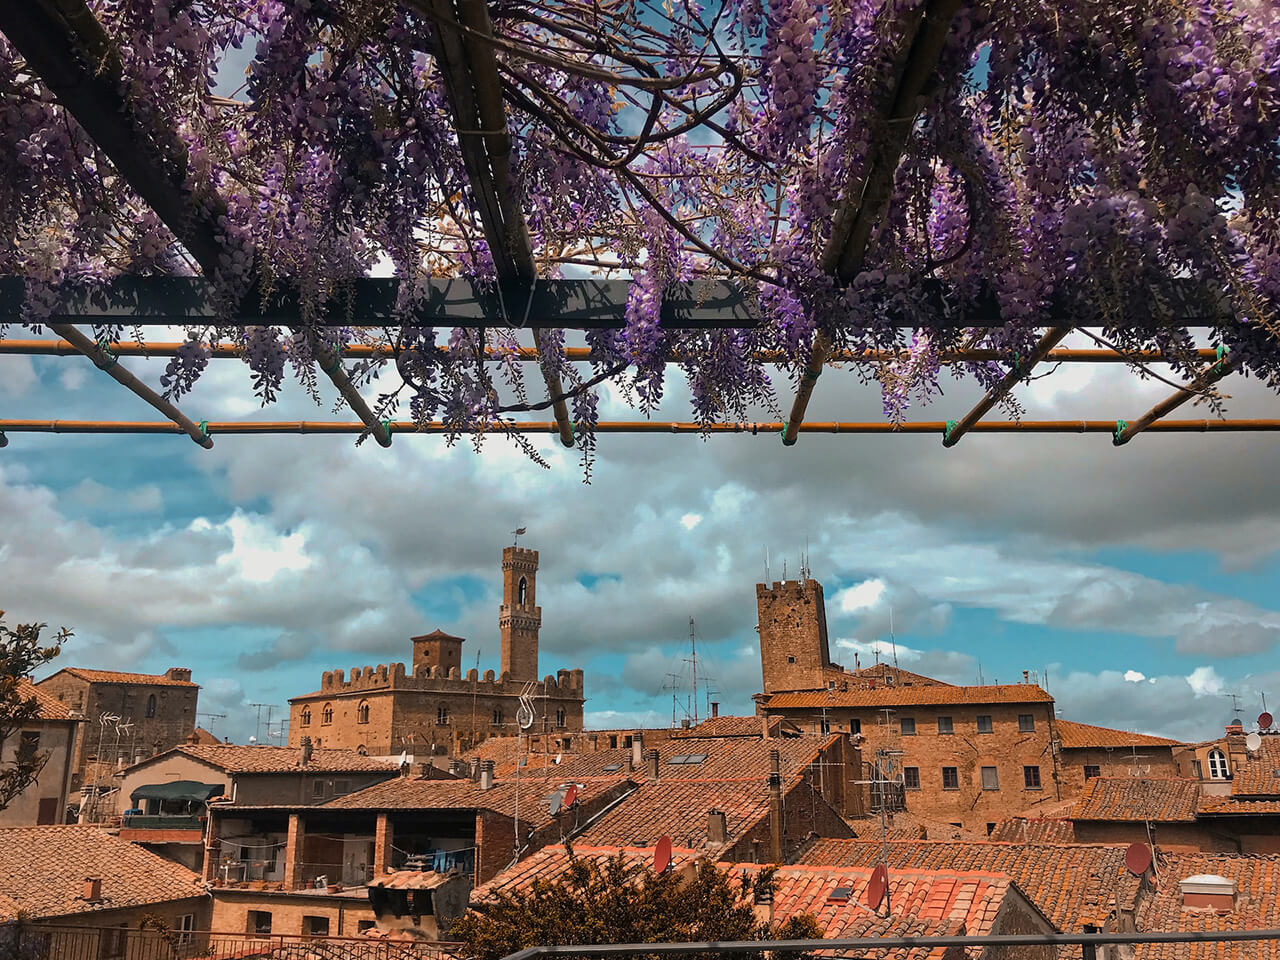 Volterra, a walled town near Bolgheri, is famous for Twilight but also has a rich history dating back to 800 BC. Don't miss the Roman theater and cathedral.